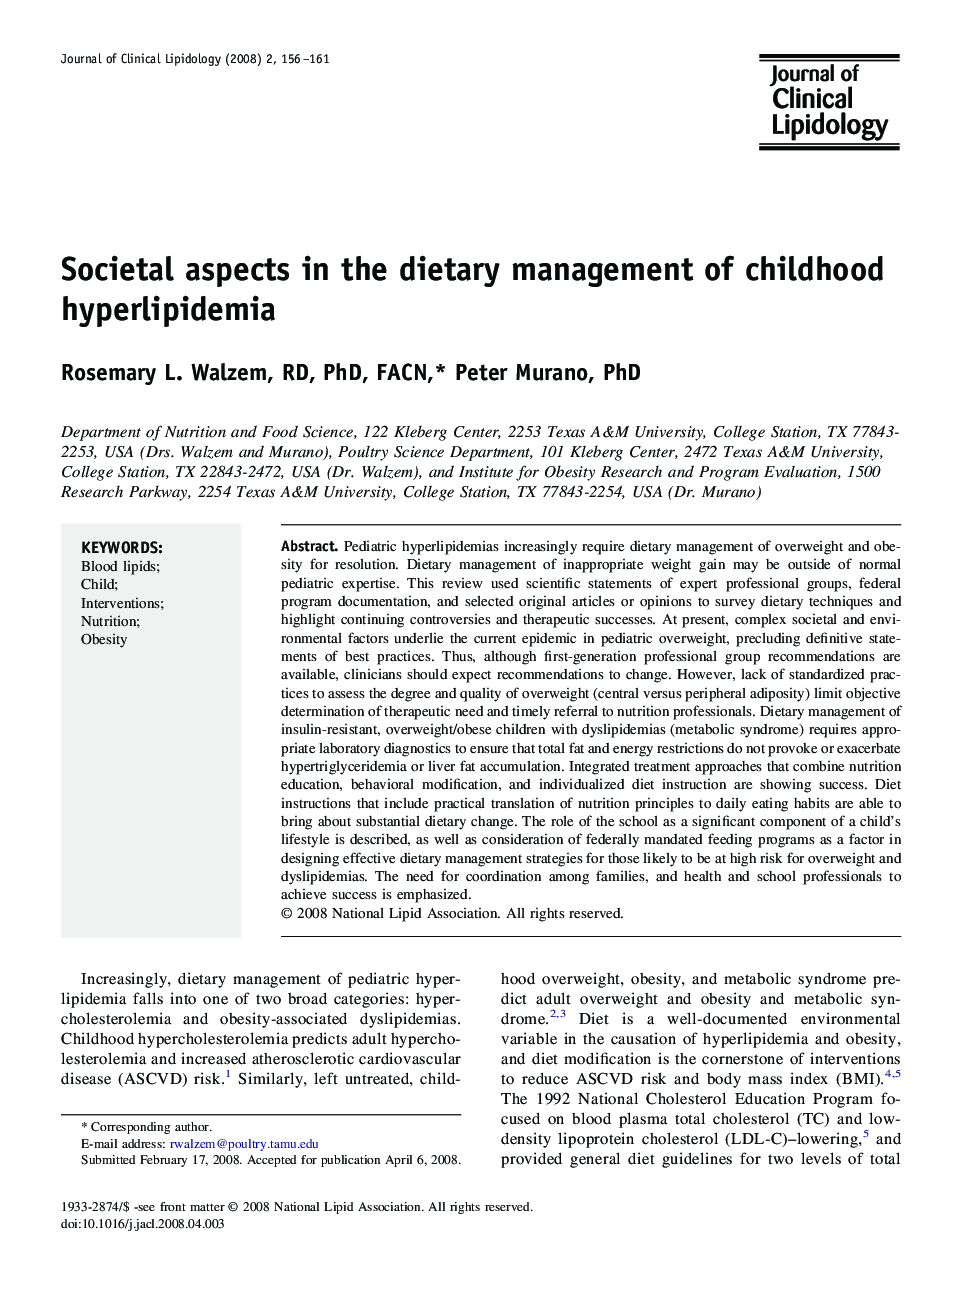 Societal aspects in the dietary management of childhood hyperlipidemia